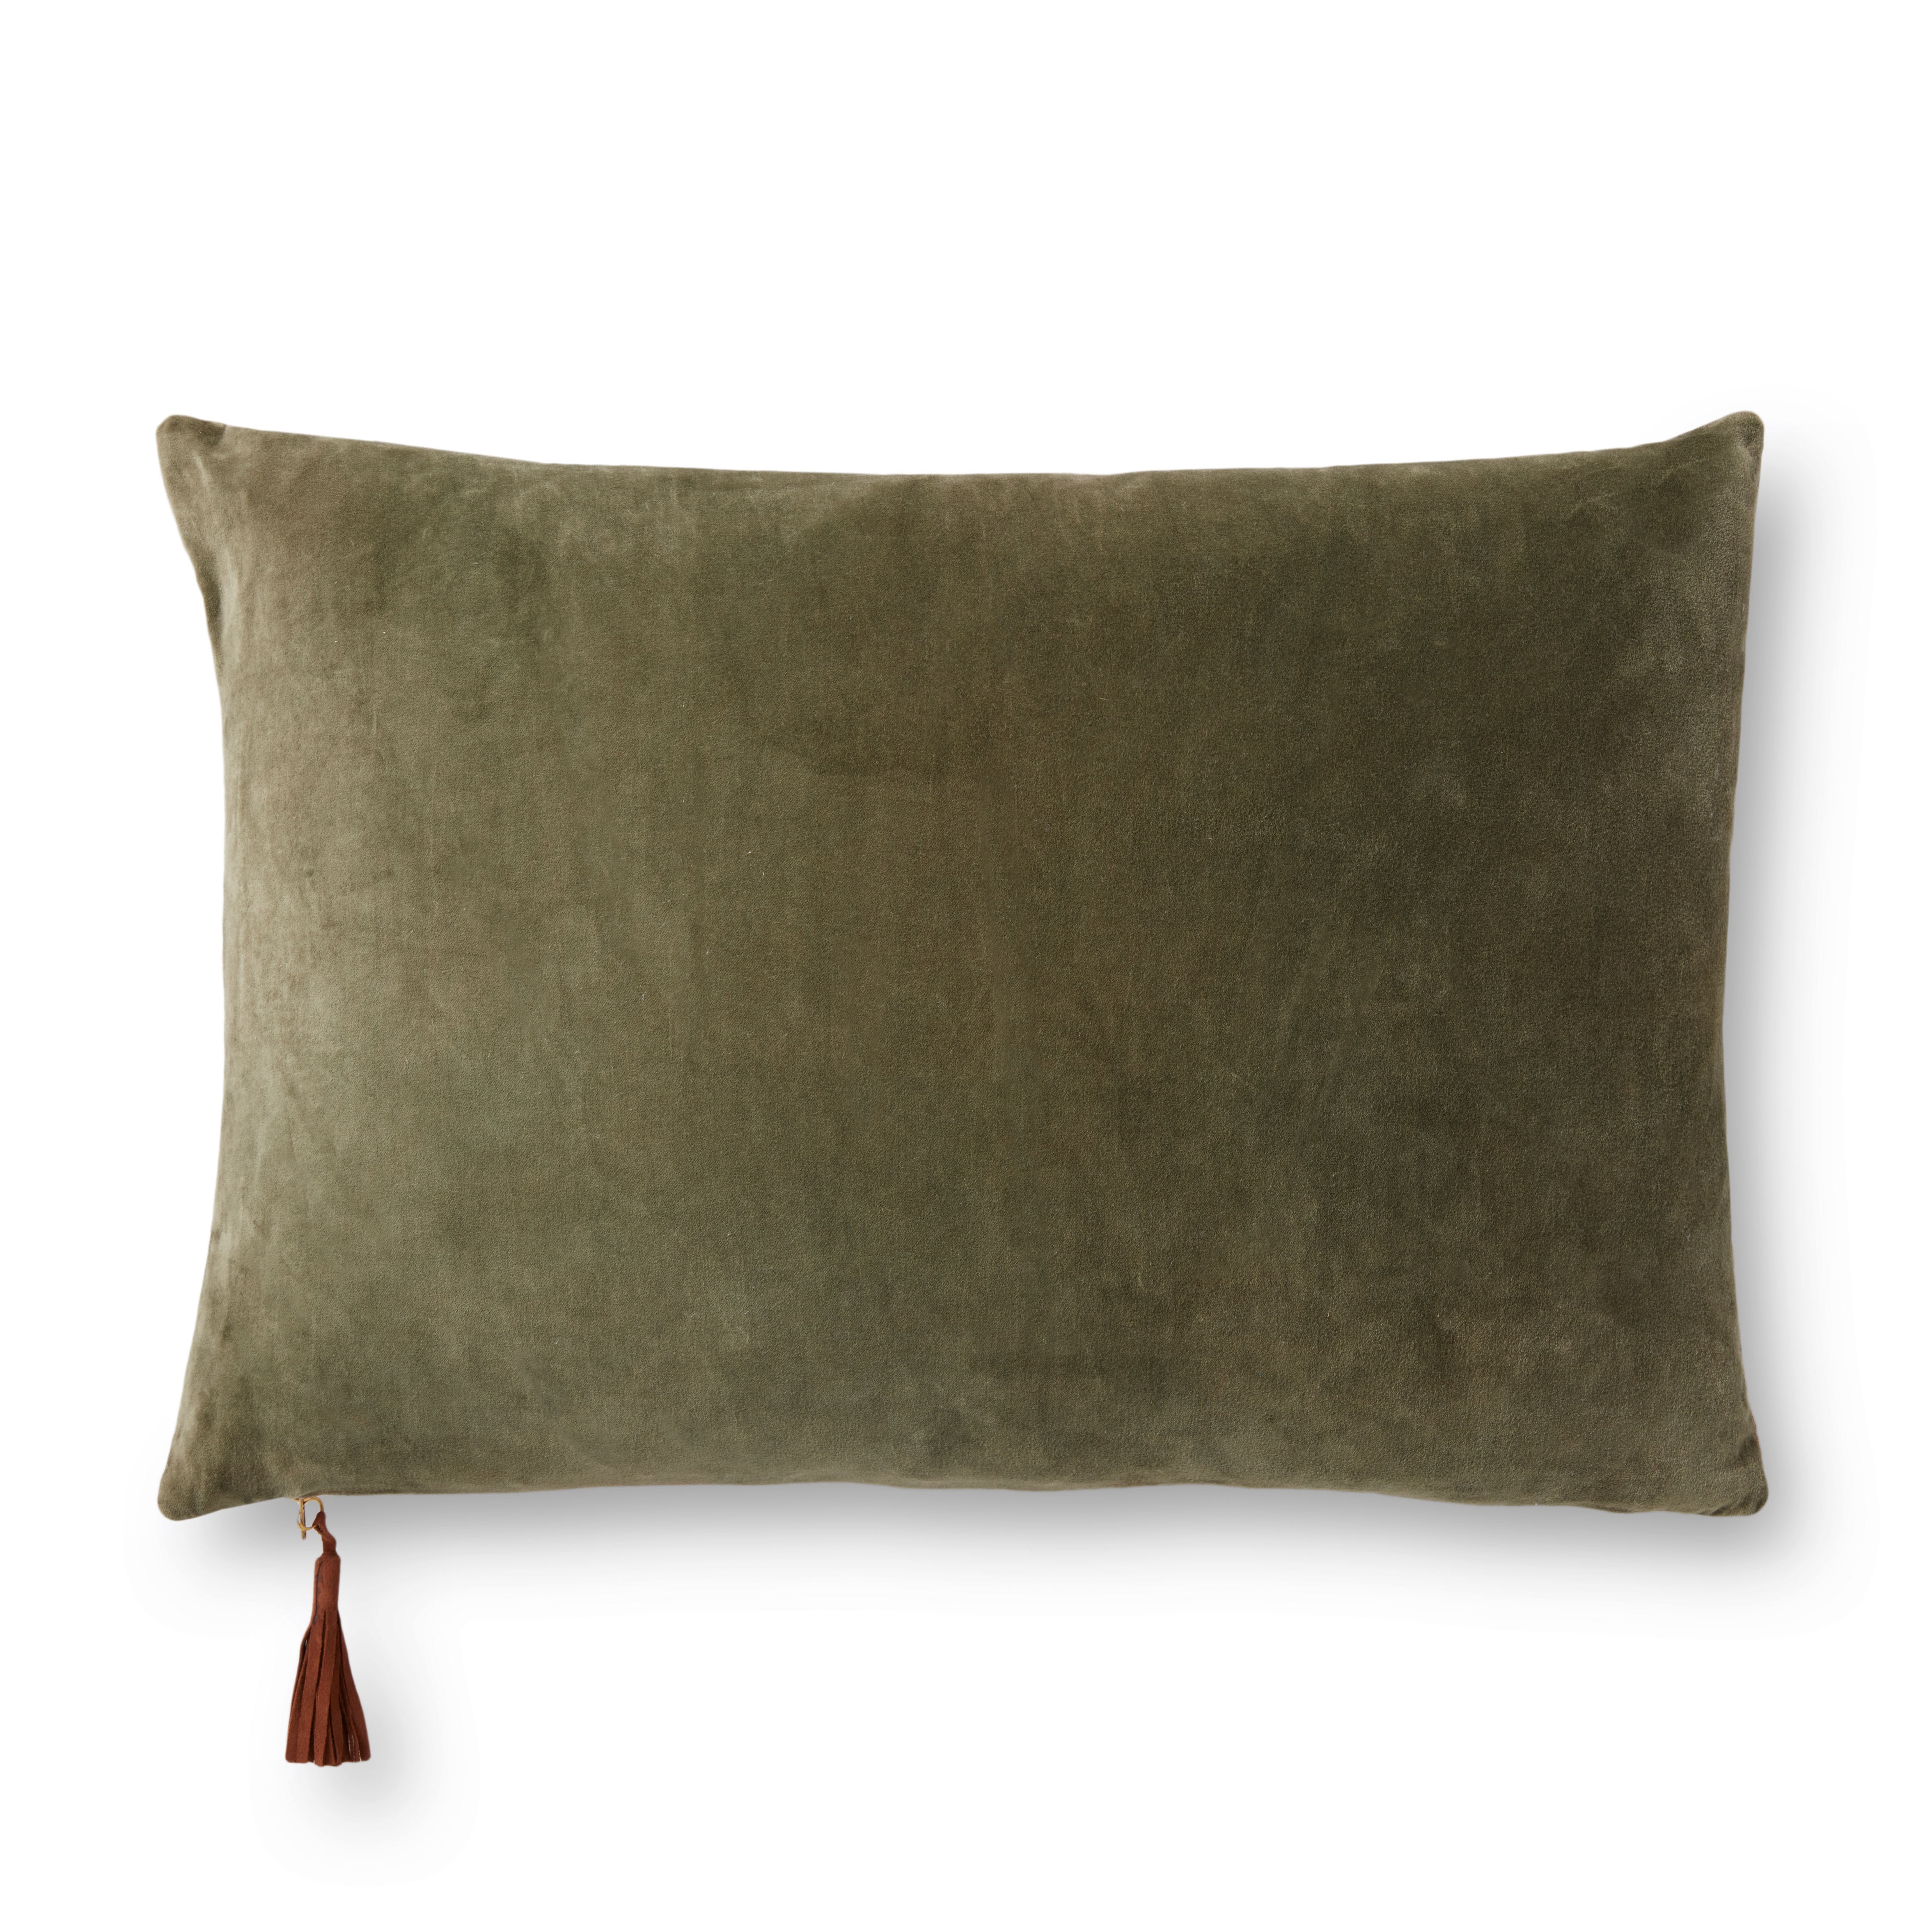 PILLOWS PMH1153 MOSS / BEIGE 16" x 26" Cover w/Poly - Magnolia Home by Joana Gaines Crafted by Loloi Rugs